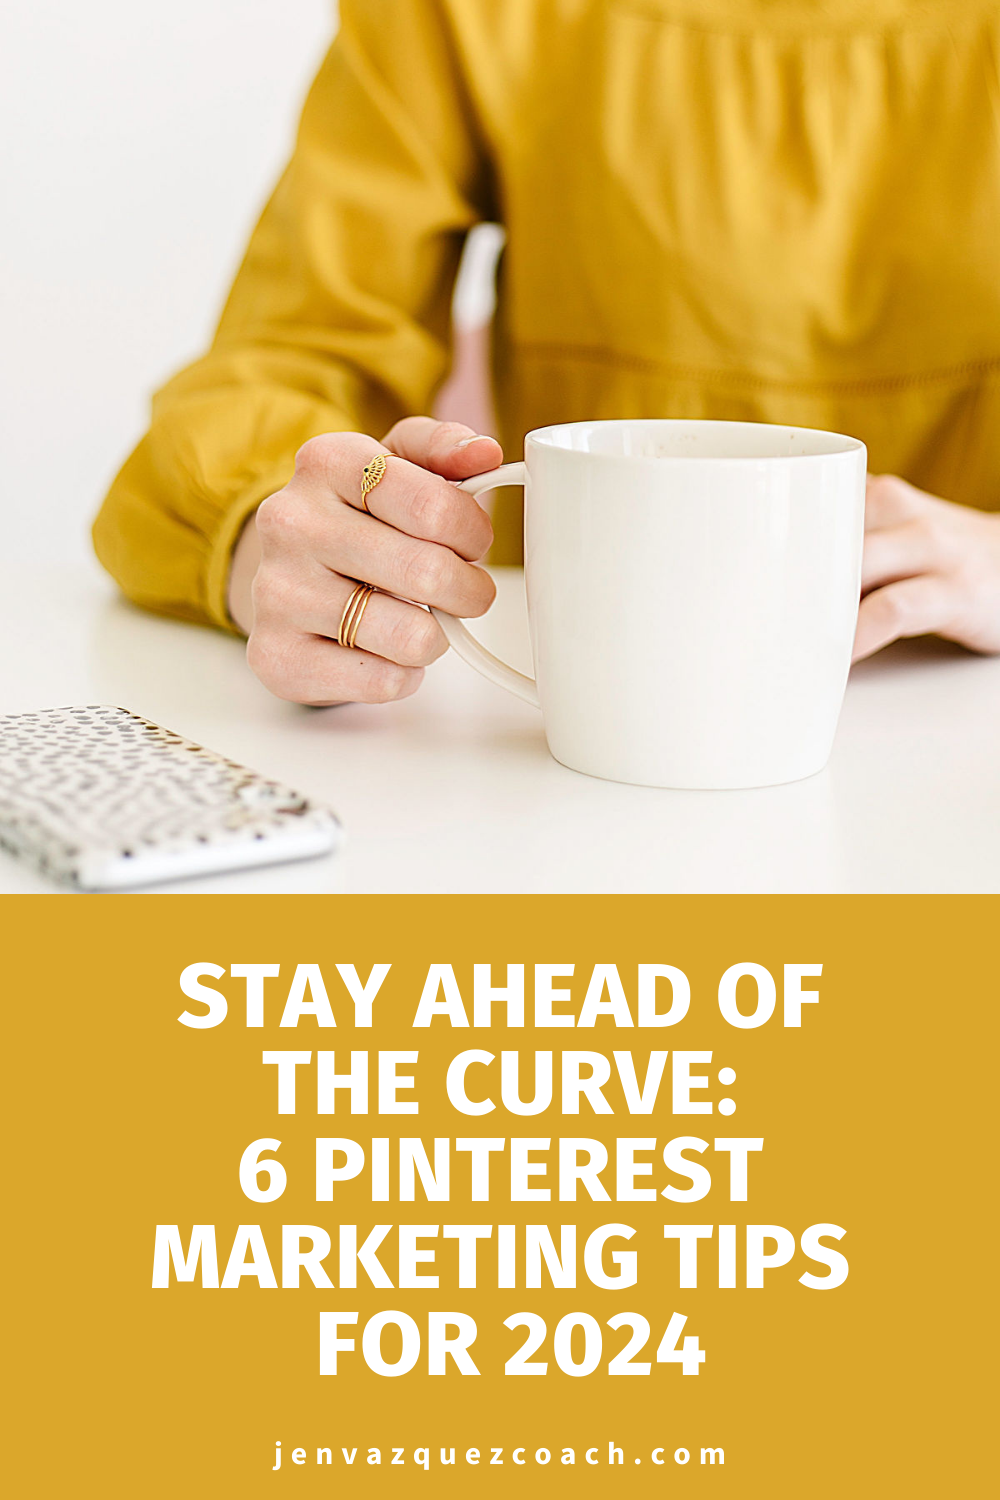 6 things to focus on for Pinterest marketing going into 2024 by Jen Vazquez Media